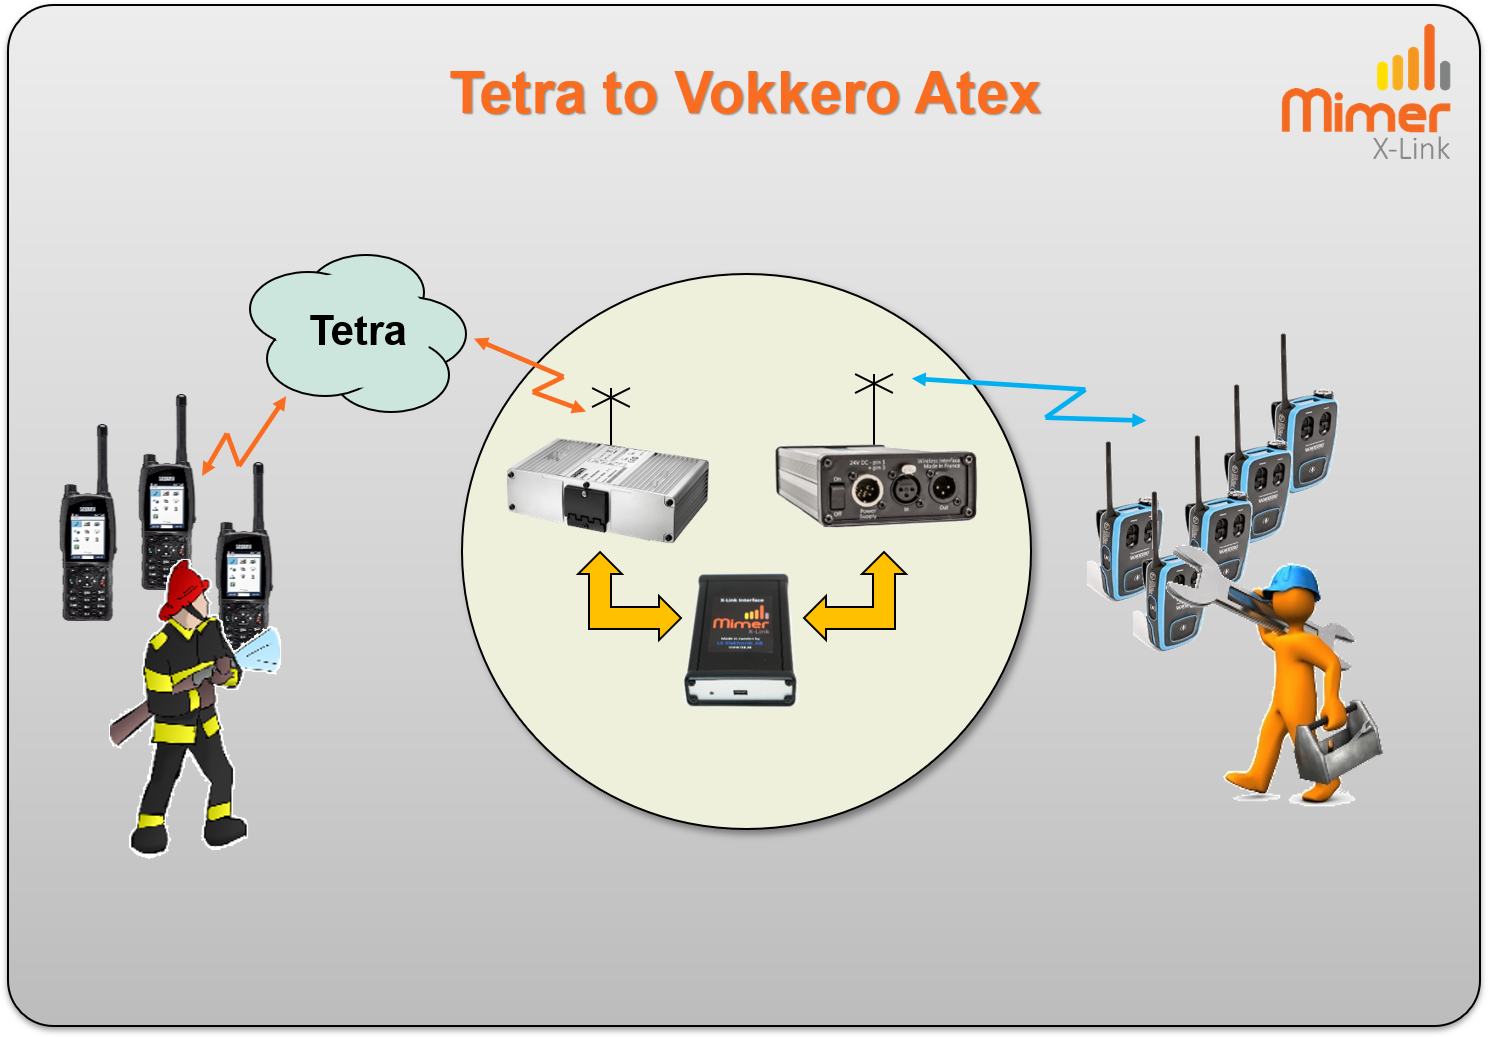 X-link connection of Tetra to Vokkero Atex